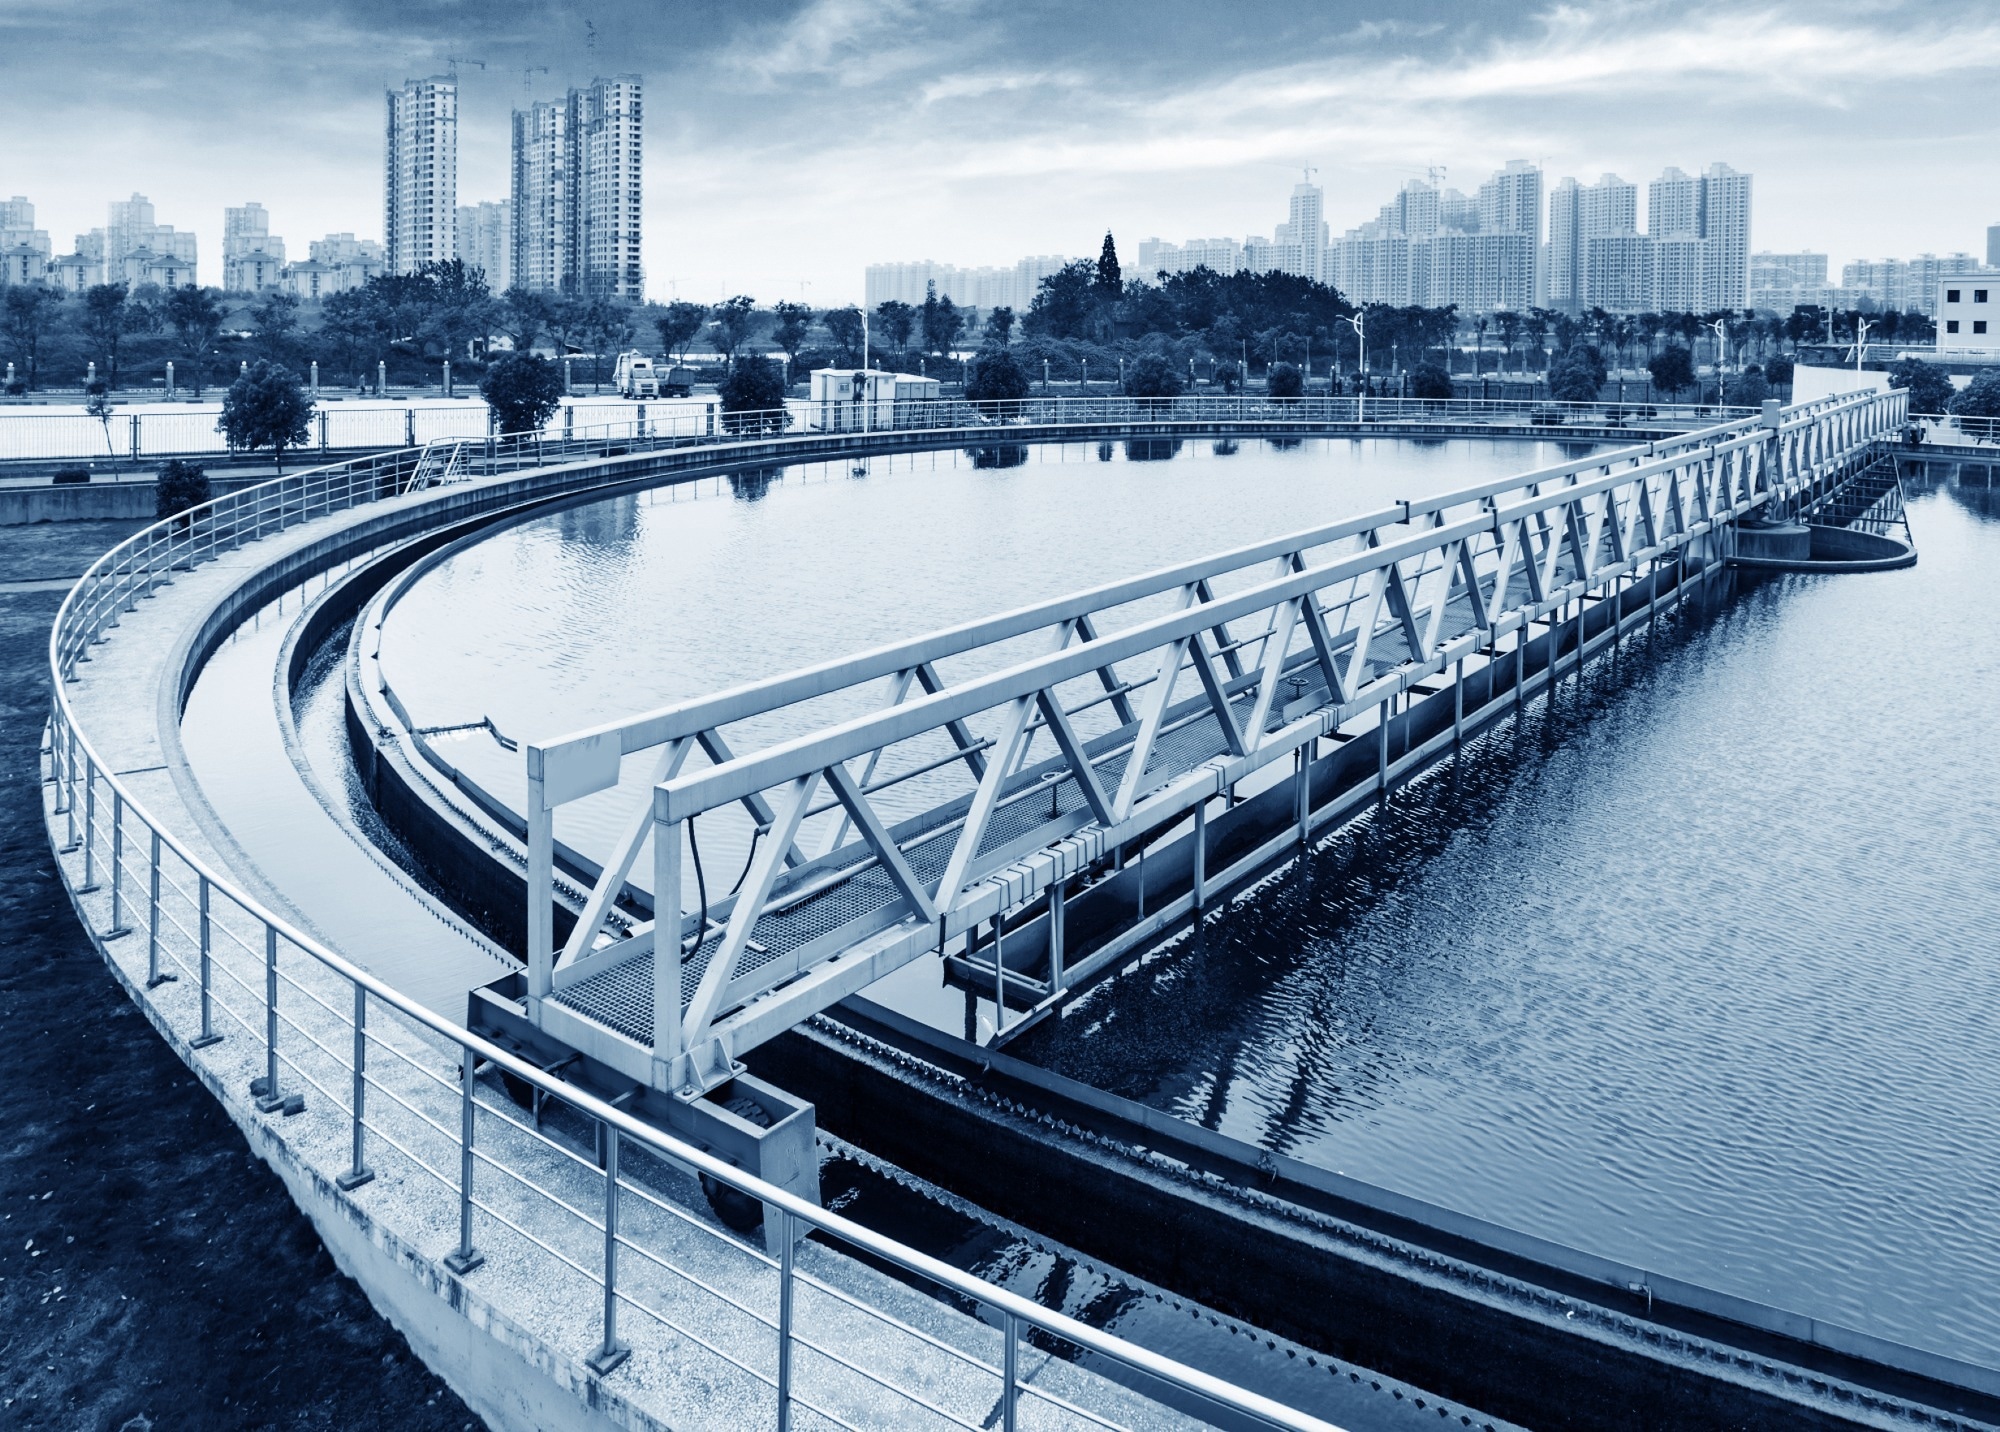 Study: Omicron COVID-19 case estimates based on previous SARS-CoV-2 wastewater load, Regional Municipality of Peel, Ontario, Canada. Image Credit: hxdyl / Shutterstock.com